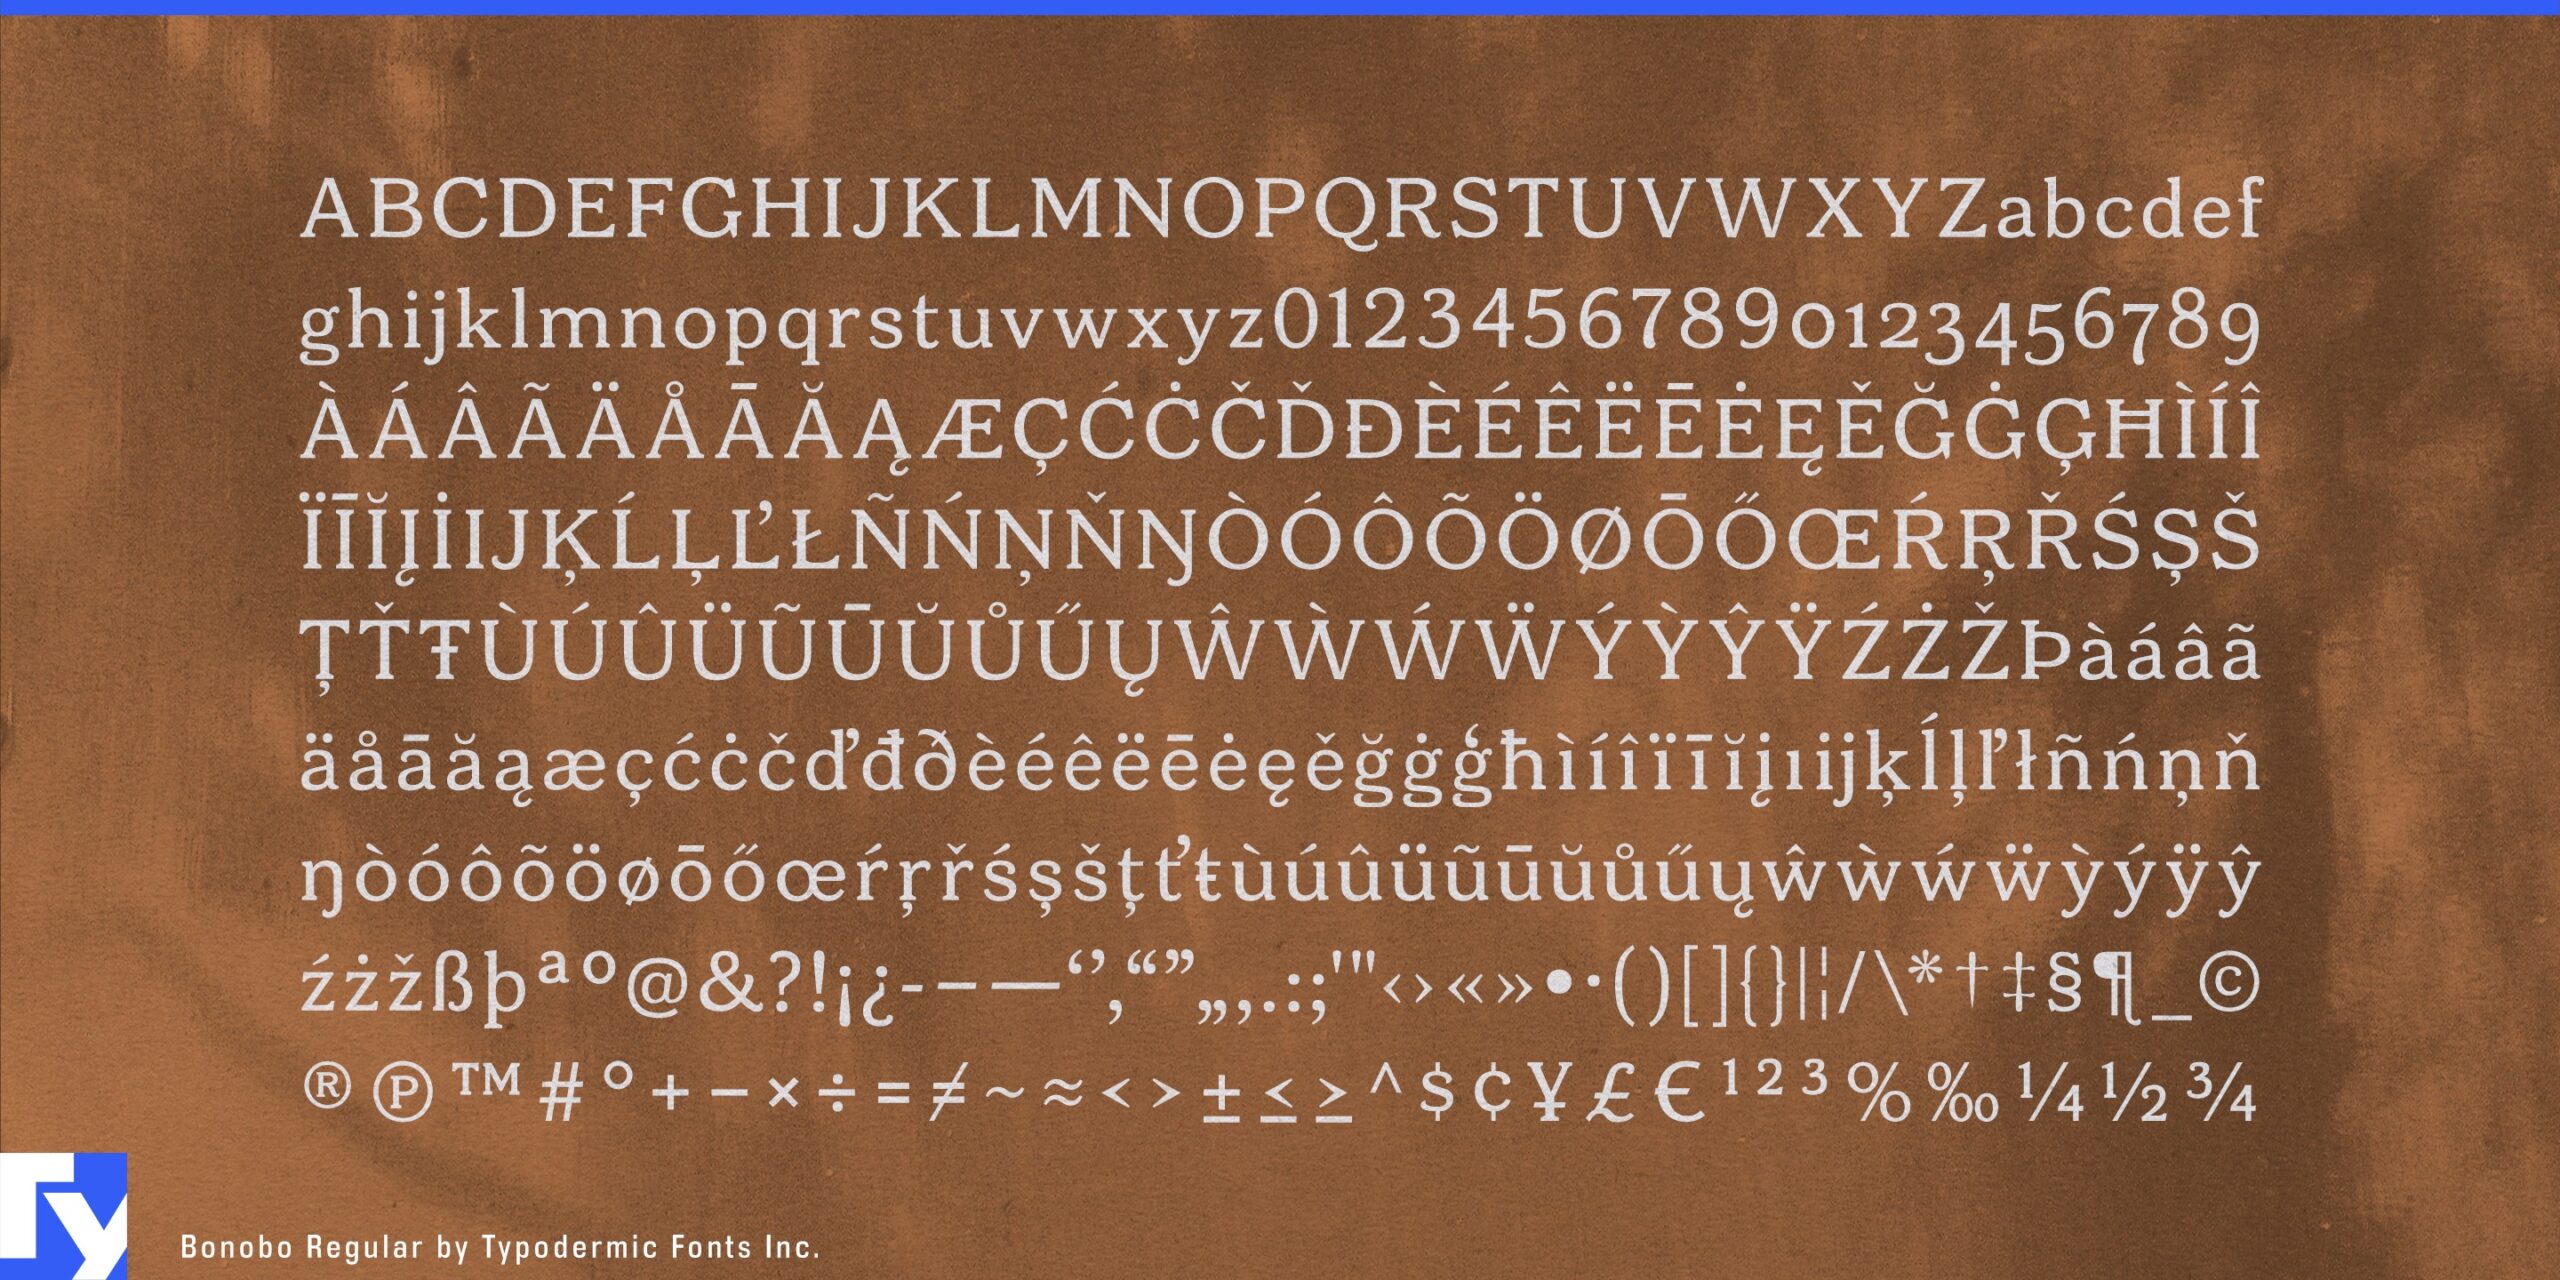 A Friendly Vibe with a Touch of Sophistication: Bonobo Typeface Shines